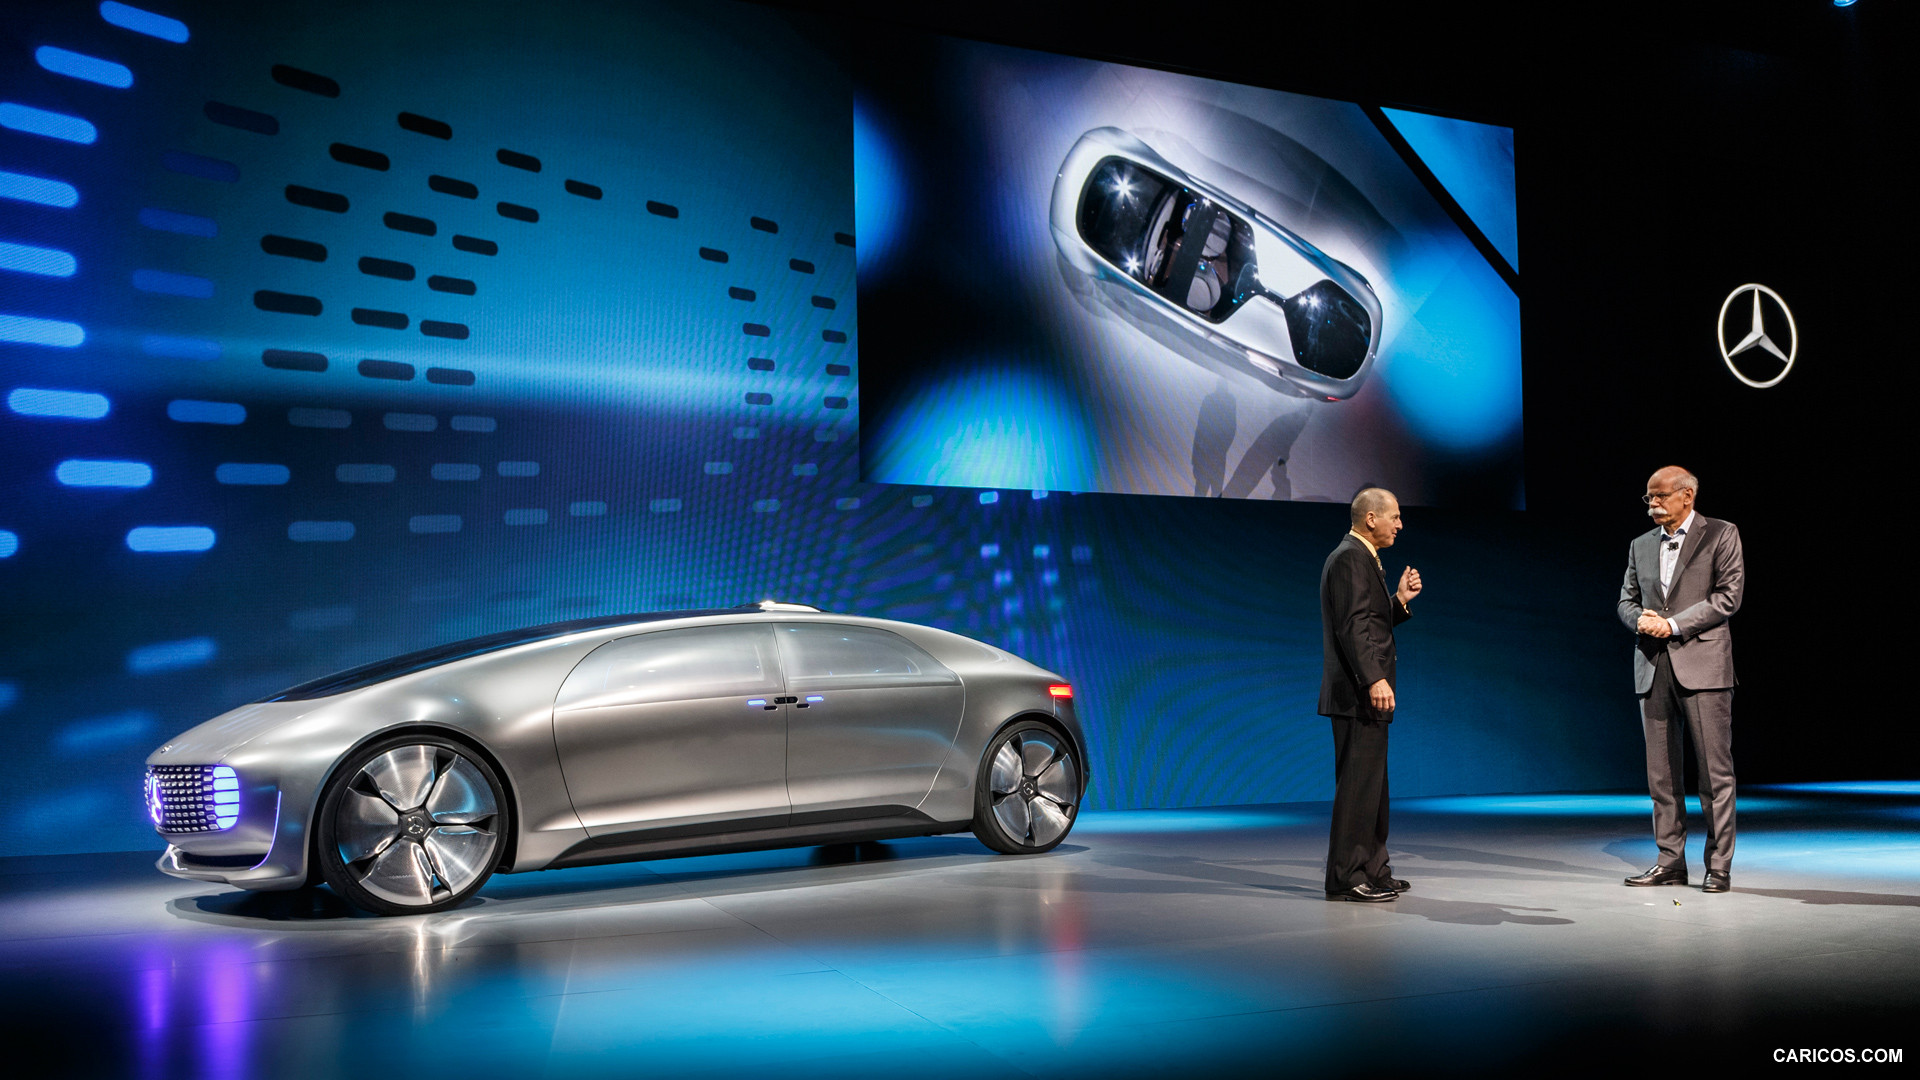 2015 Mercedes-Benz F 015 Luxury in Motion Concept at CES - Side, #87 of 92